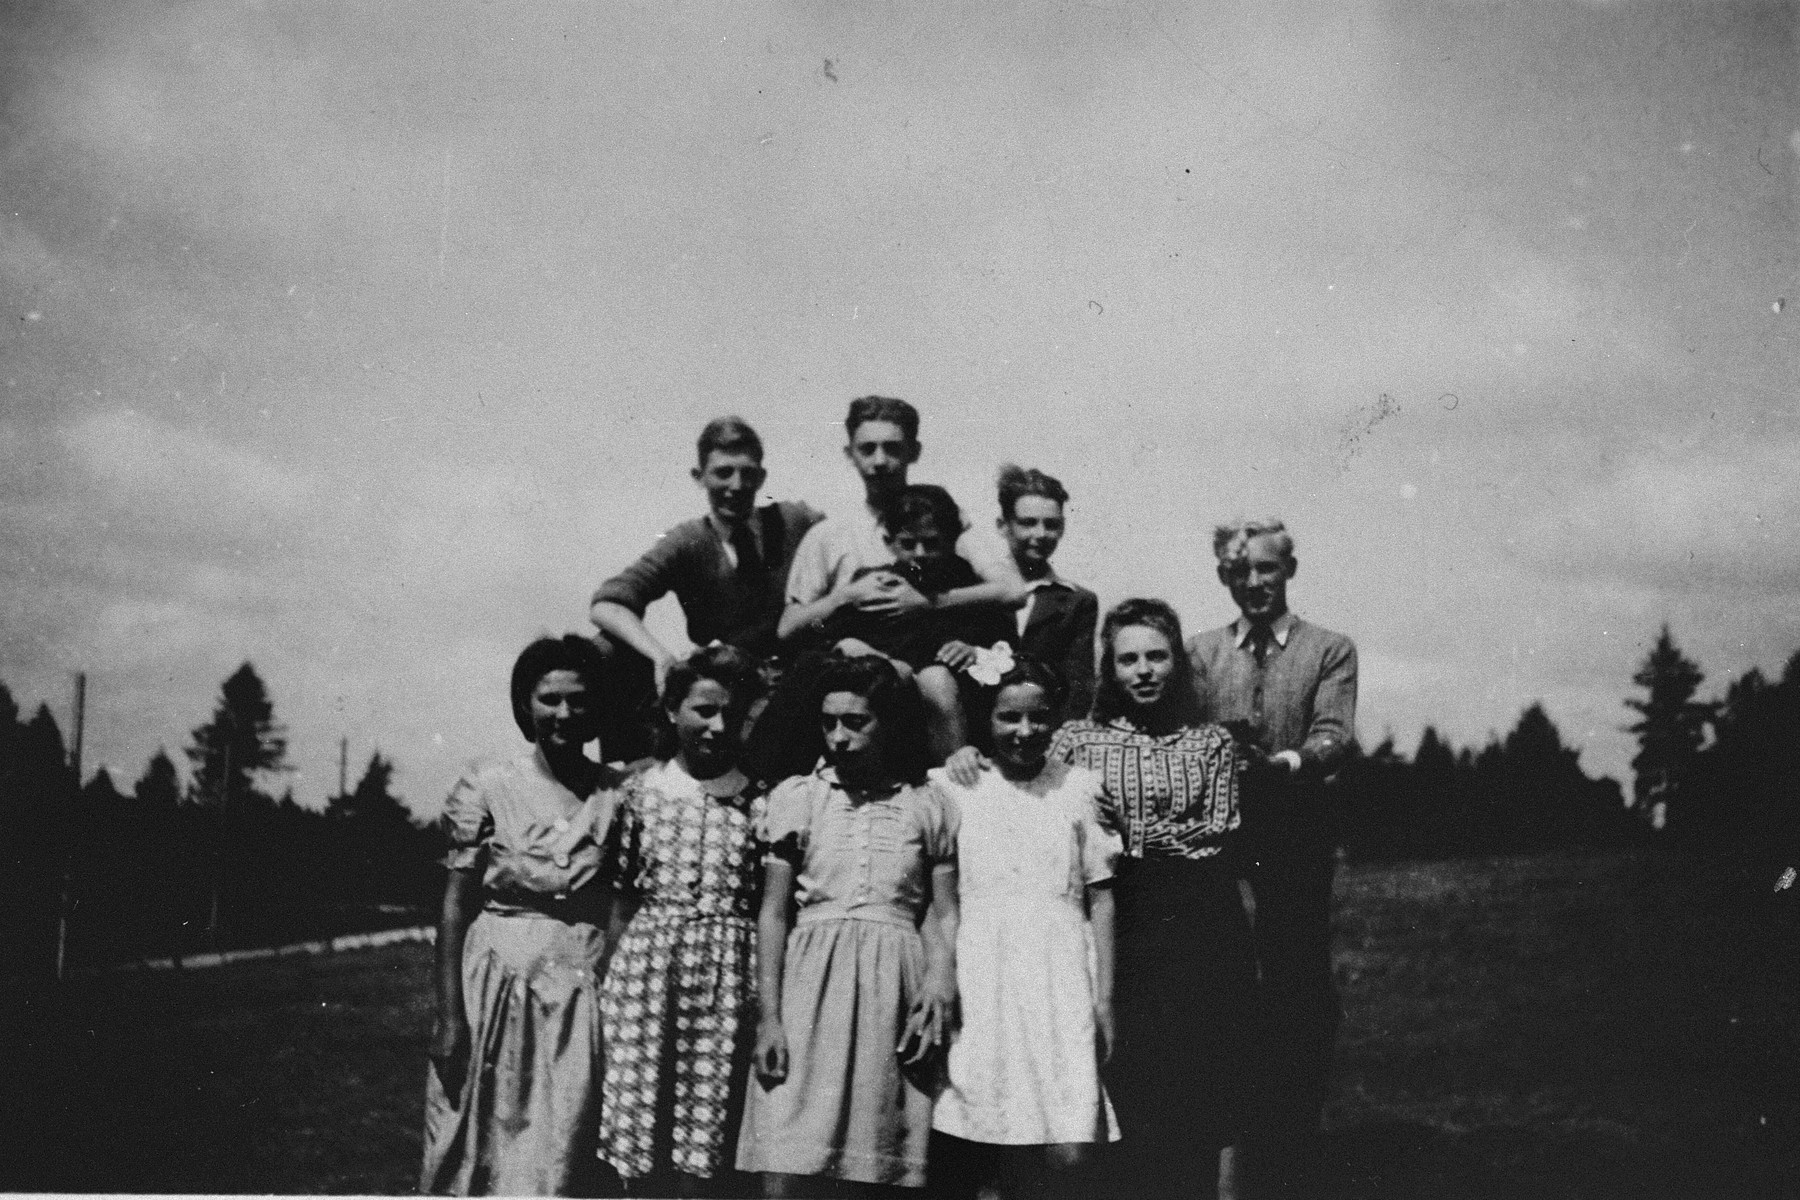 Group portrait of Jewish and non-Jewish refugee children sheltered in various public and private homes in Le Chambon-sur-Lignon during World War II.

Among those pictured are: Antonio Cascarosa (top row, center), a child of Spanish Civil war refugees, Pierre (top row, left), a young deserter from the German army, and an unnamed Czech youth (far right).